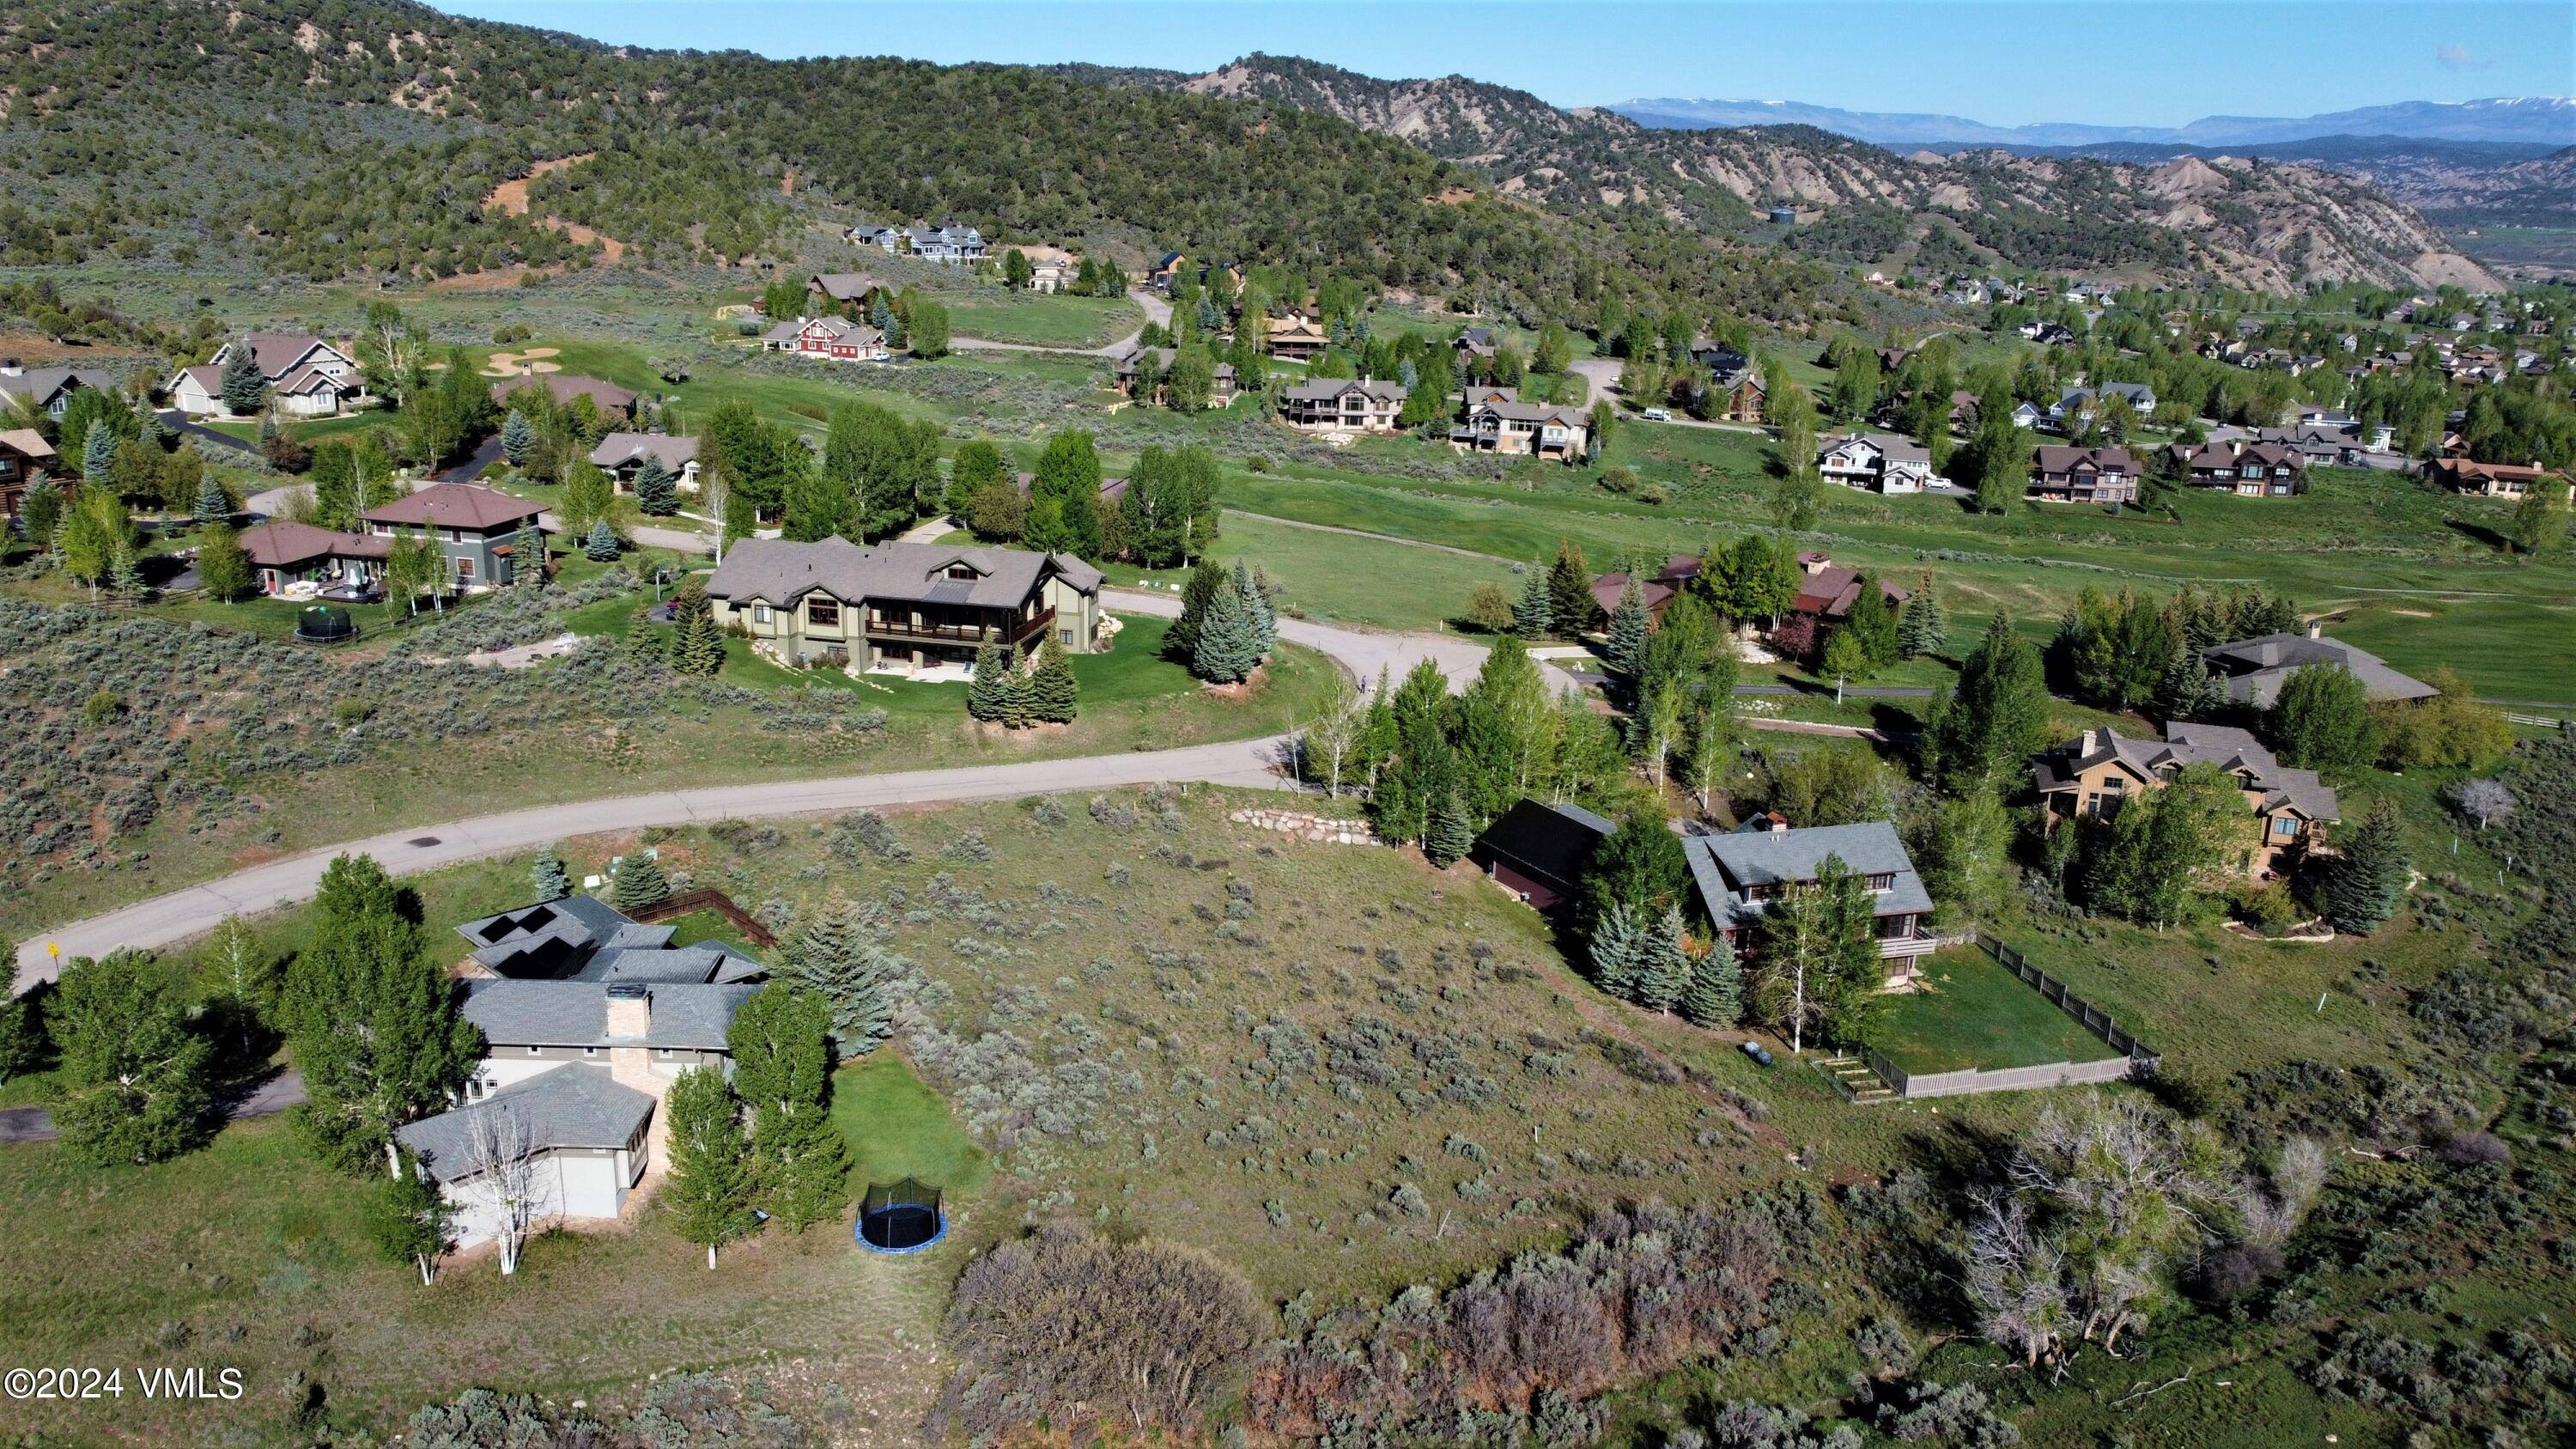 Build your Eagle Ranch dream home on this beautiful 0.